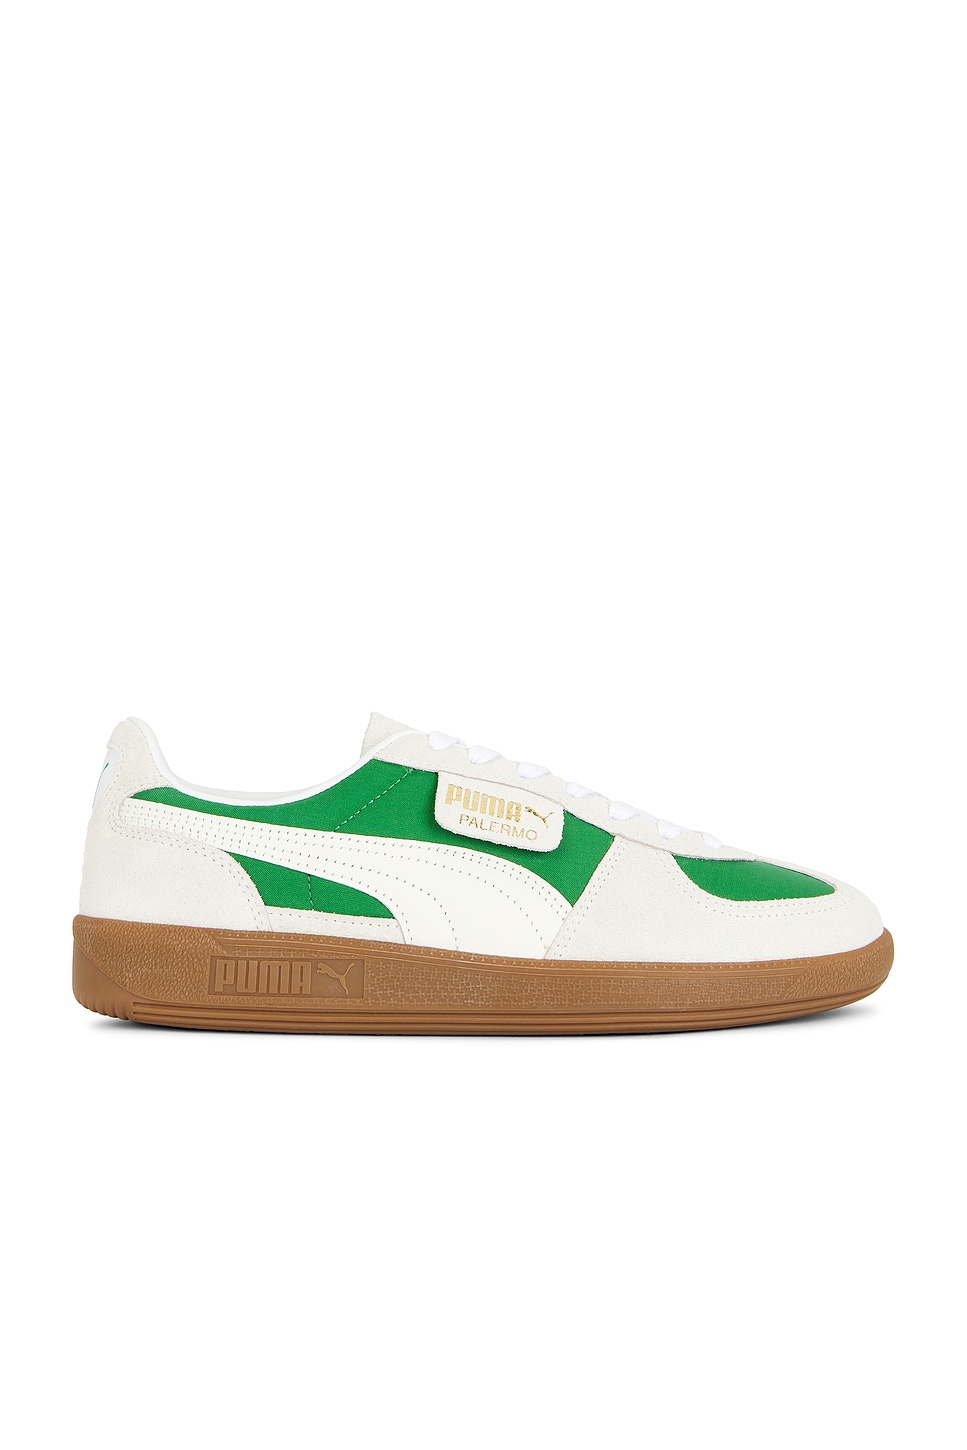 Image 1 of Puma Select Palermo Og in Archive Green & Warm White